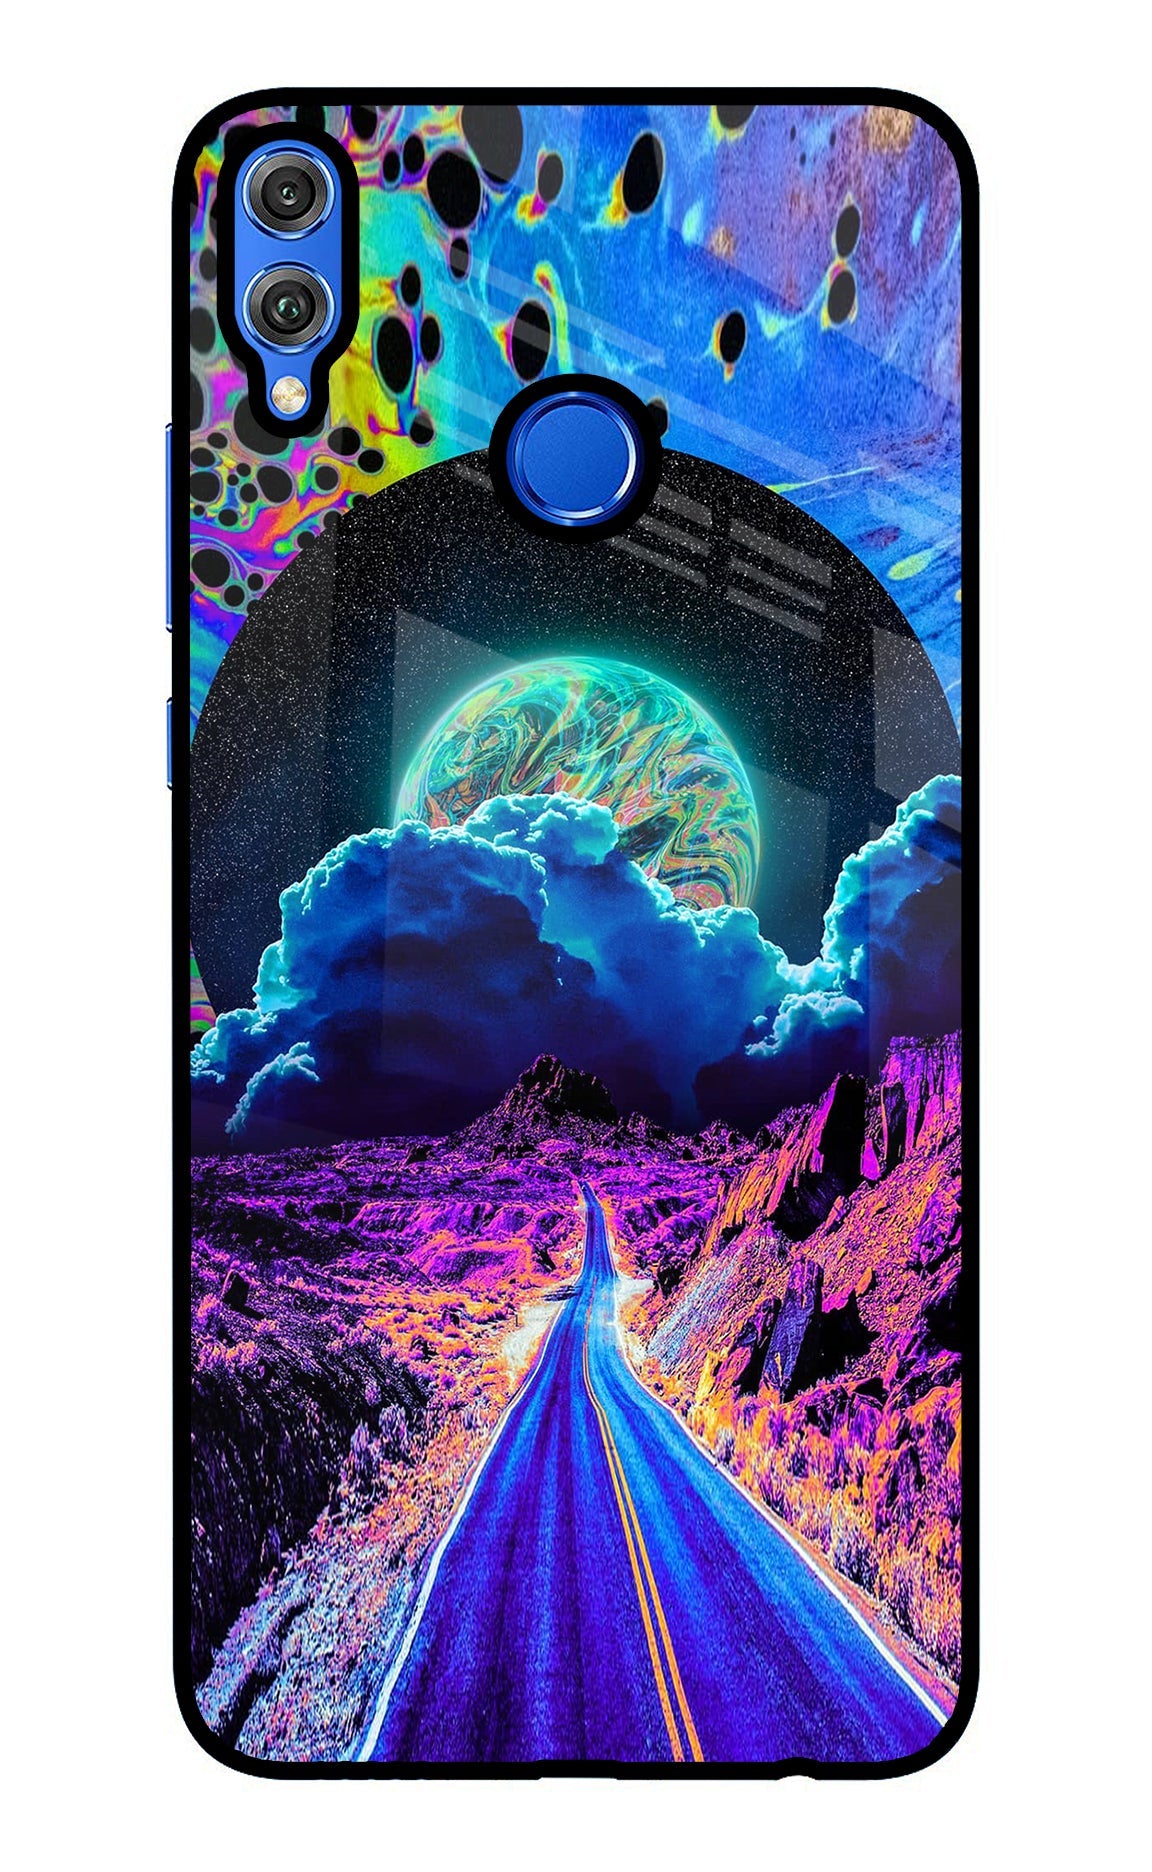 Psychedelic Painting Honor 8X Glass Case